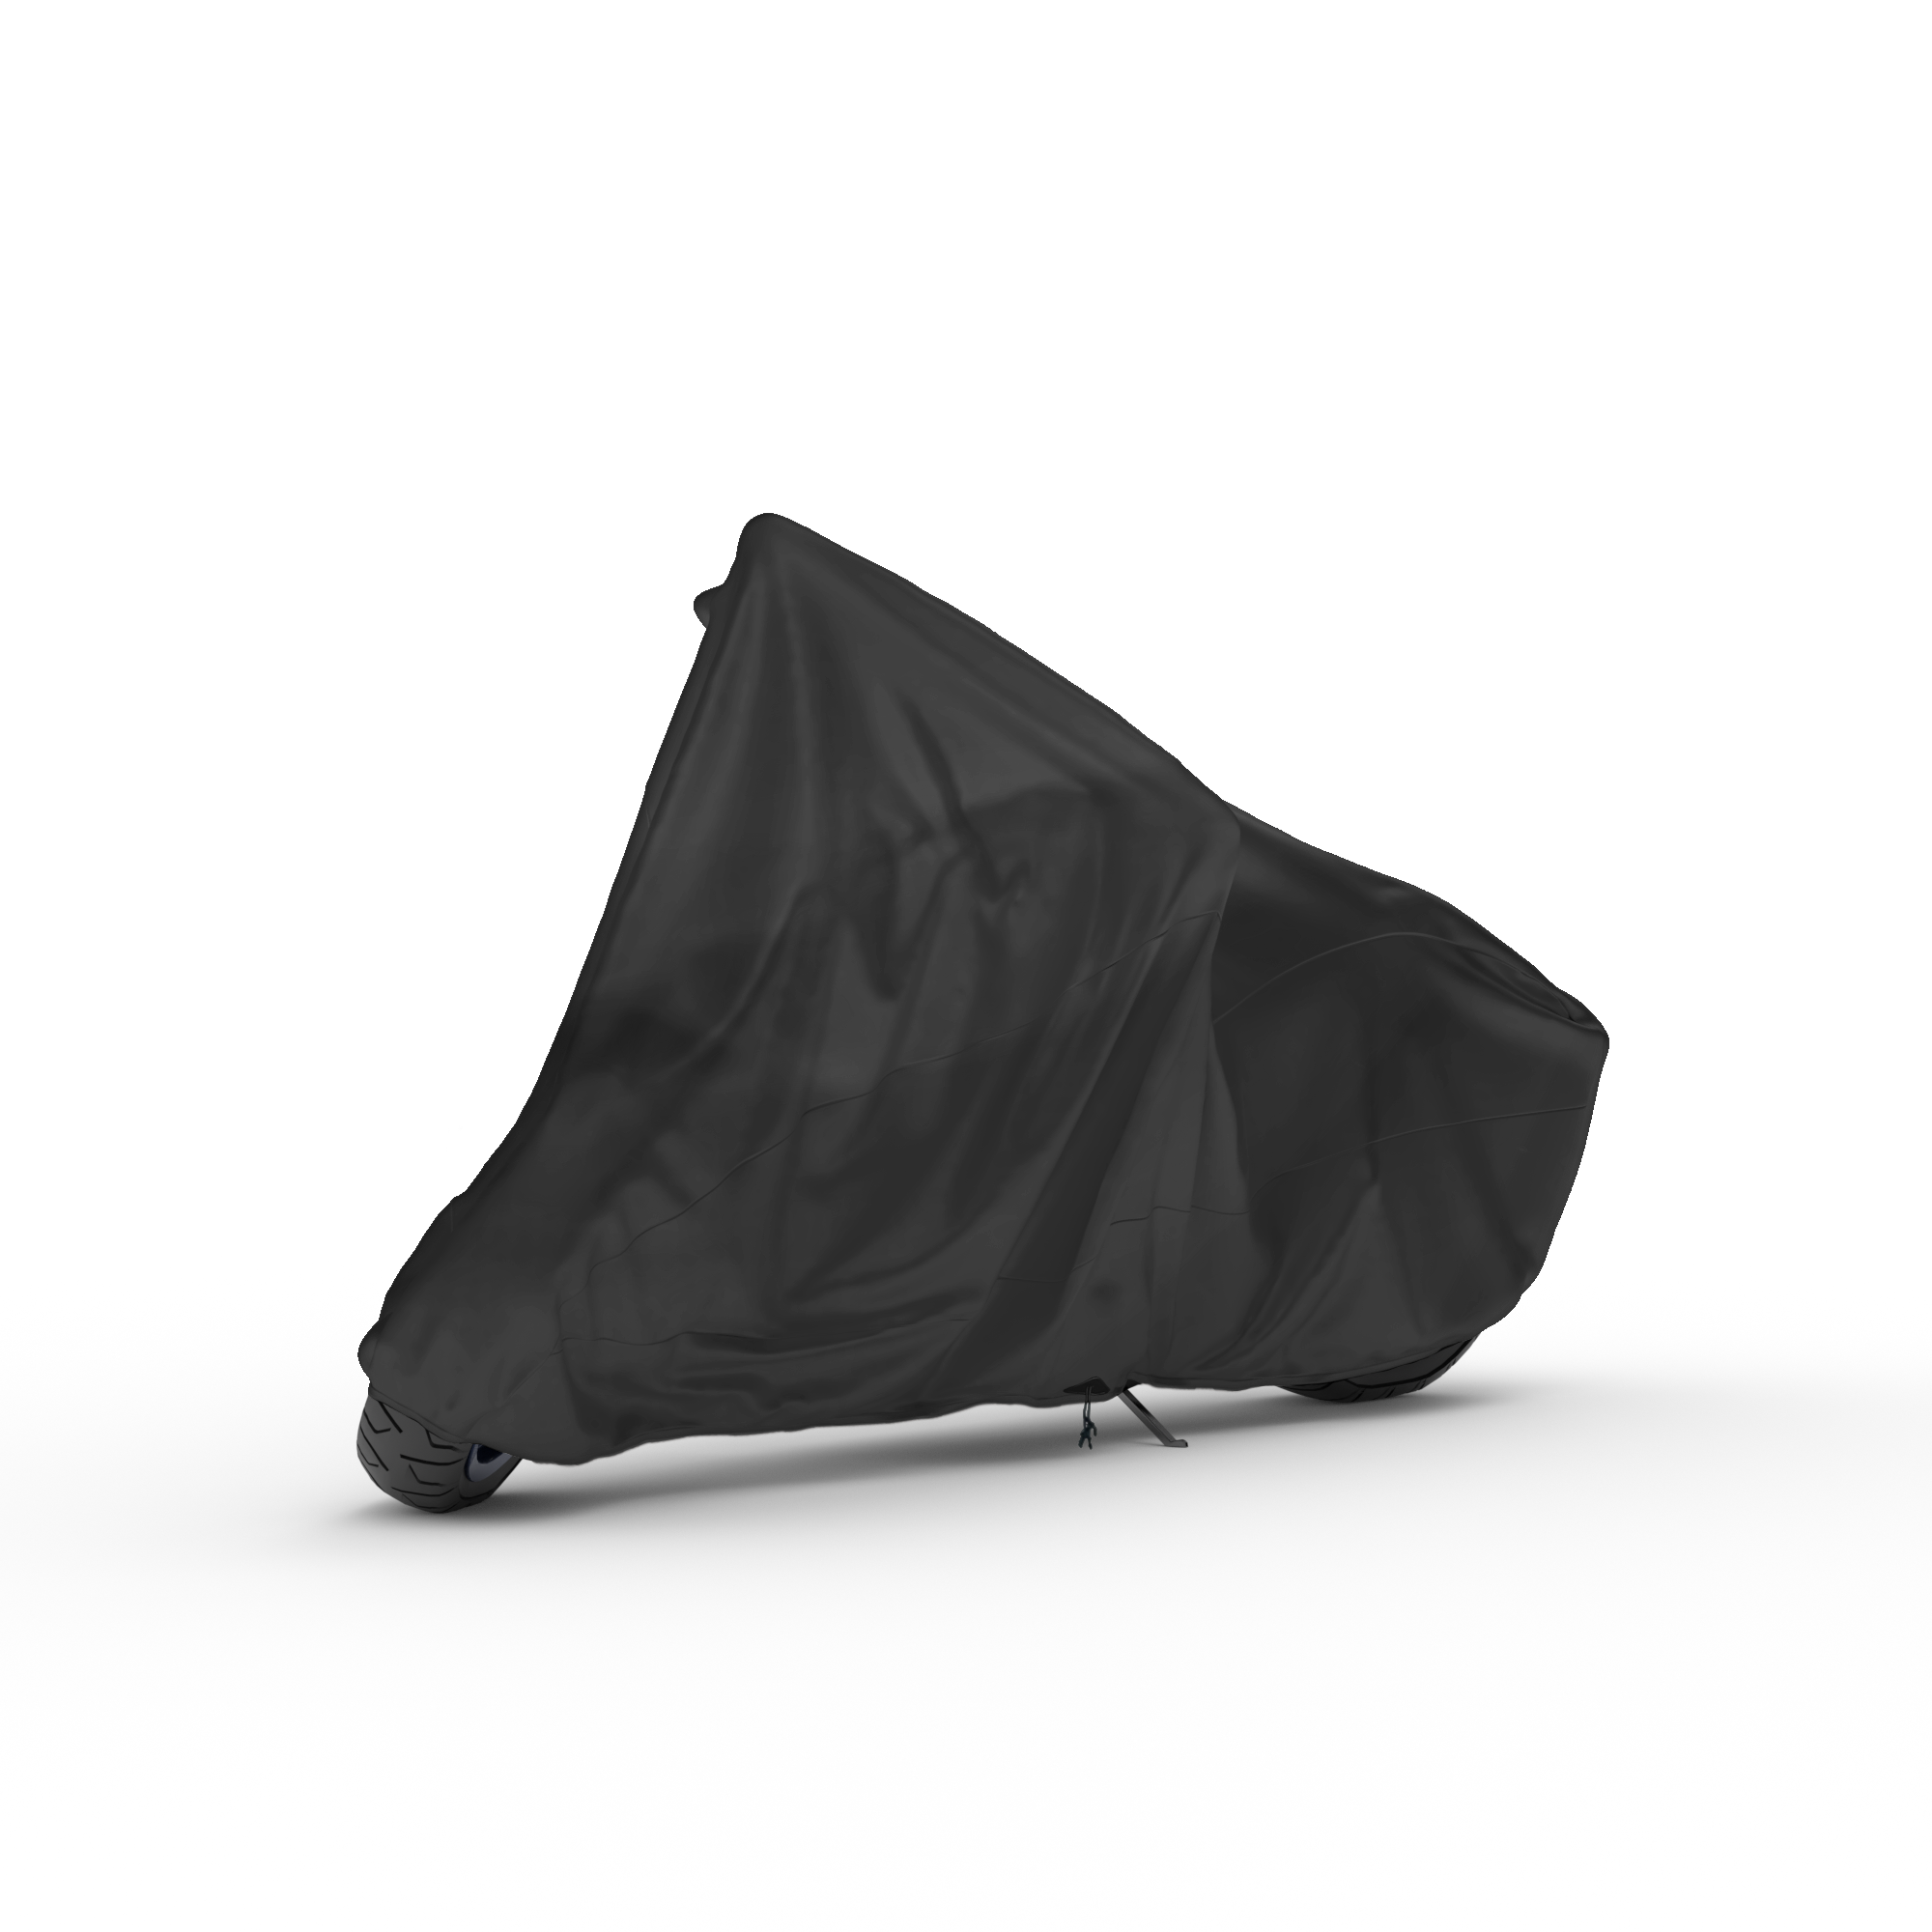 Deluxe Shield Motorcycle Cover